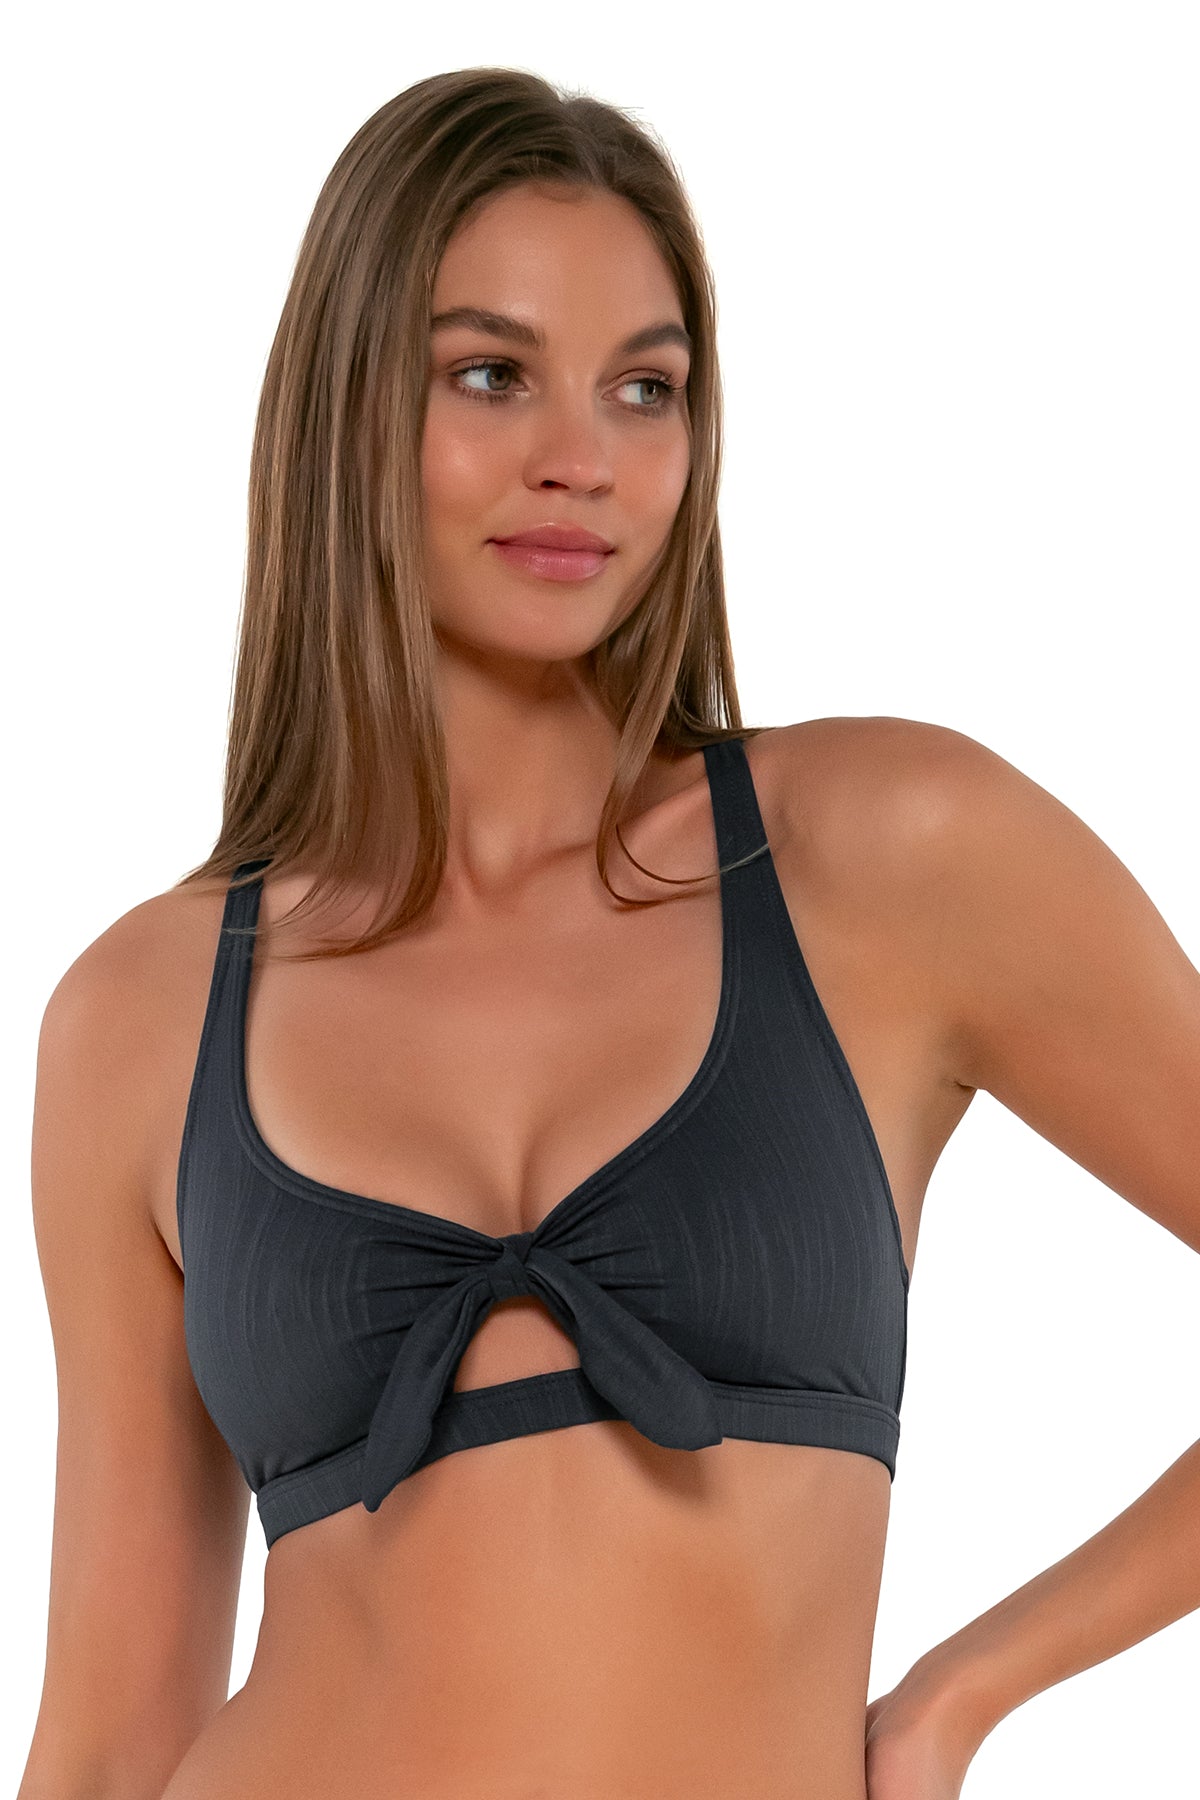 Front pose #1 of Daria wearing Sunsets Slate Seagrass Texture Brandi Bralette Top showing keyhole front tie